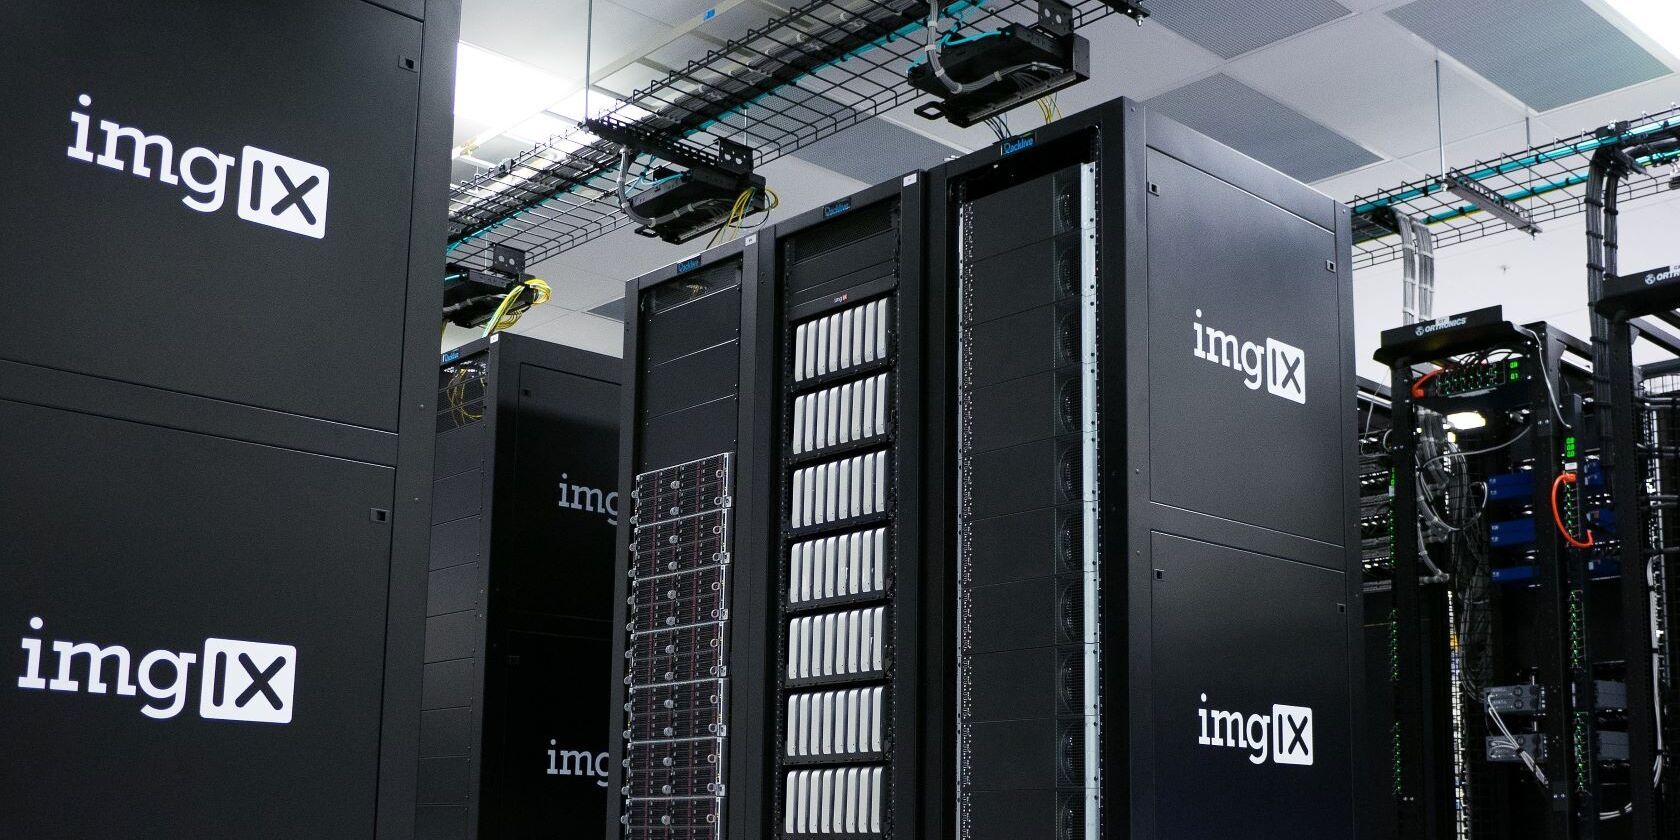 A server room containing multiple servers